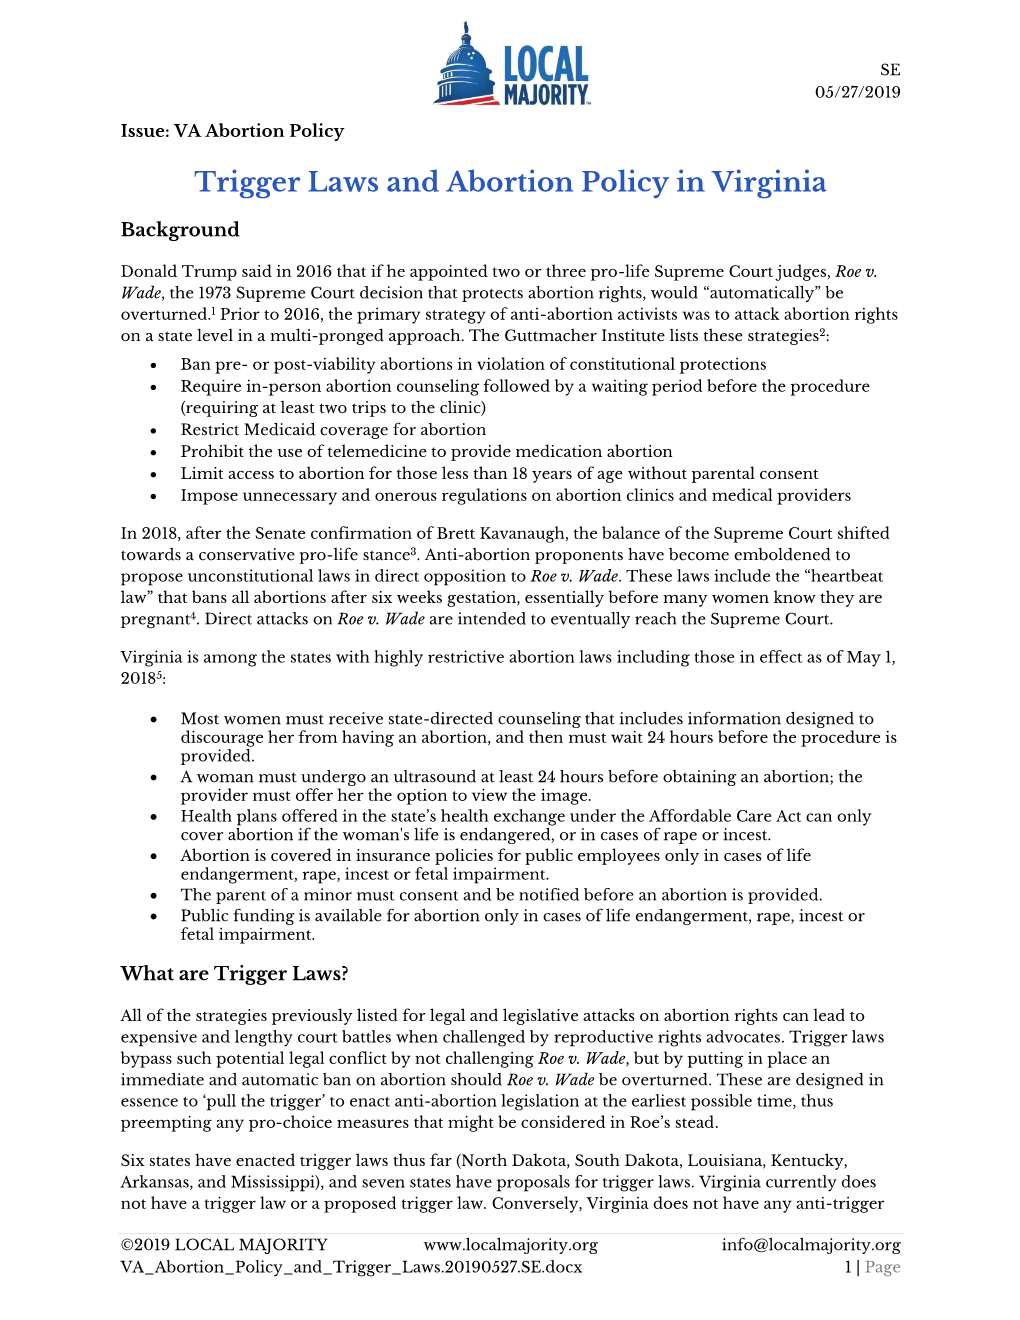 Trigger Laws and Abortion Policy in Virginia